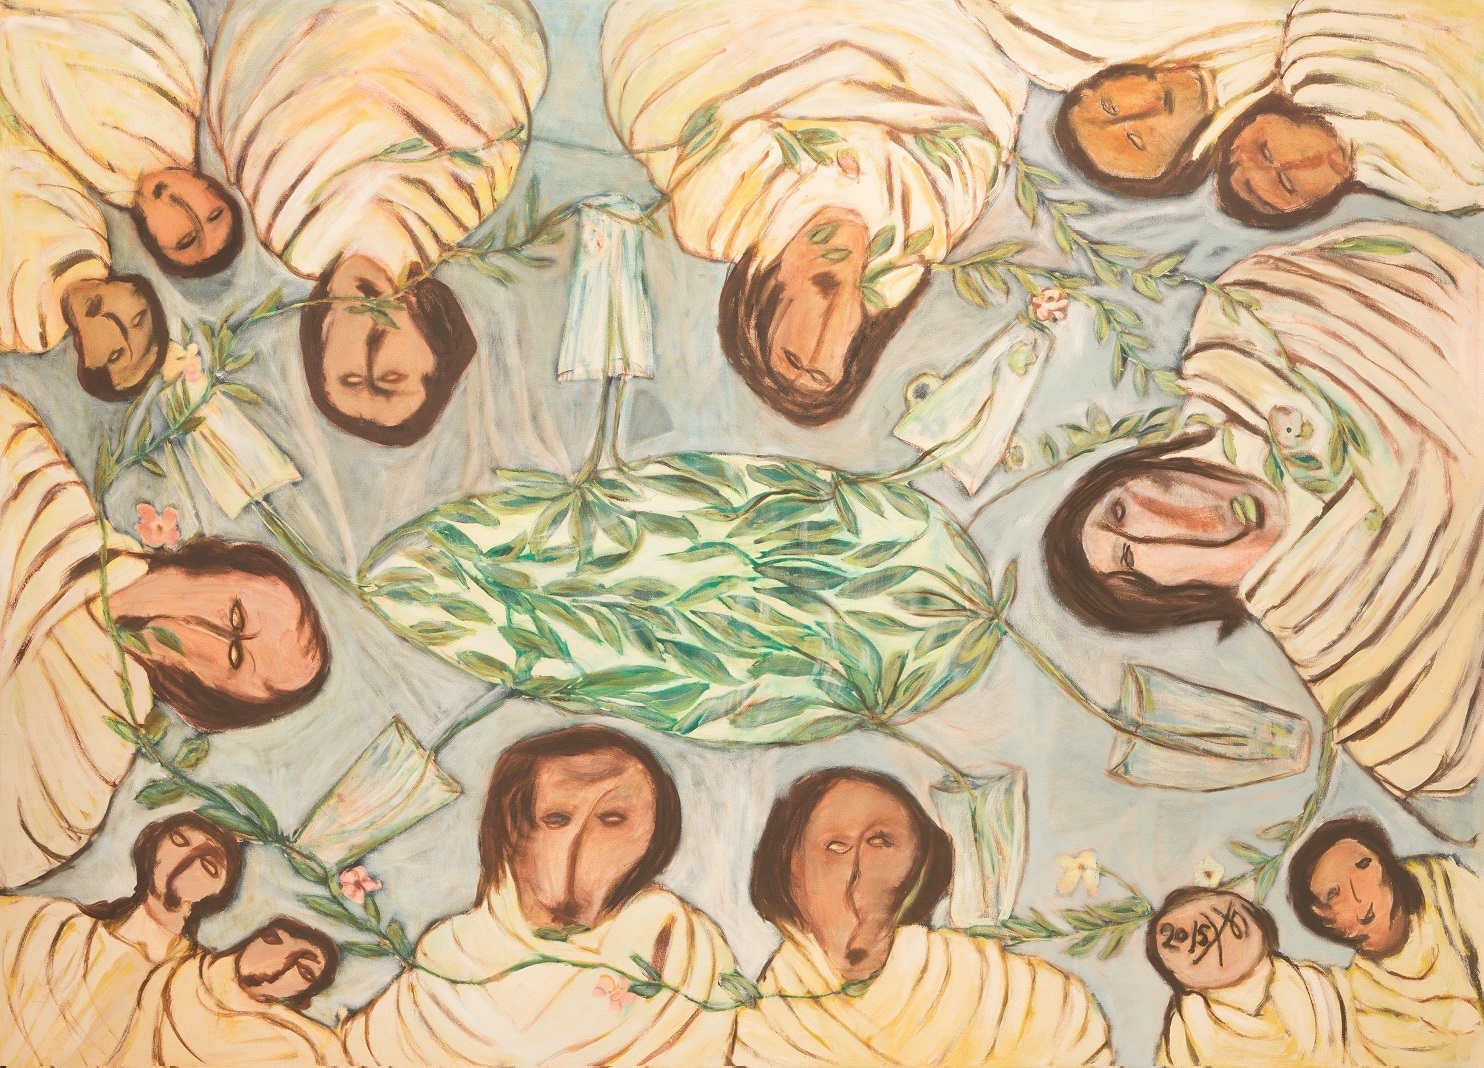 Image: Kamala Ibrahim Ishag, Women in Cubes, 2015. Oil on canvas, 155 x 115 cm. From the collection of Samia Omer Osman. Courtesy of the Sharjah Art Foundation.